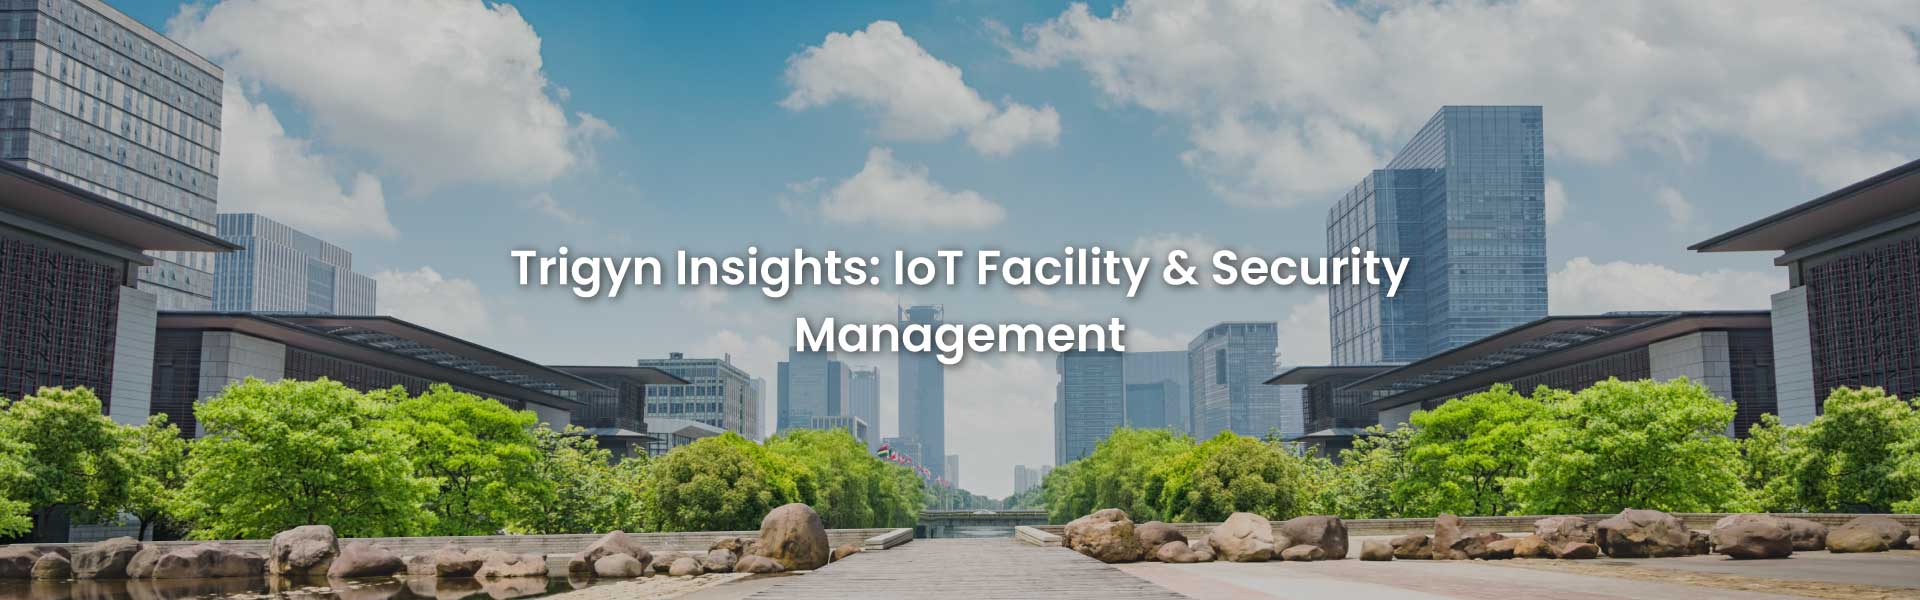 IoT Facility & Security Management